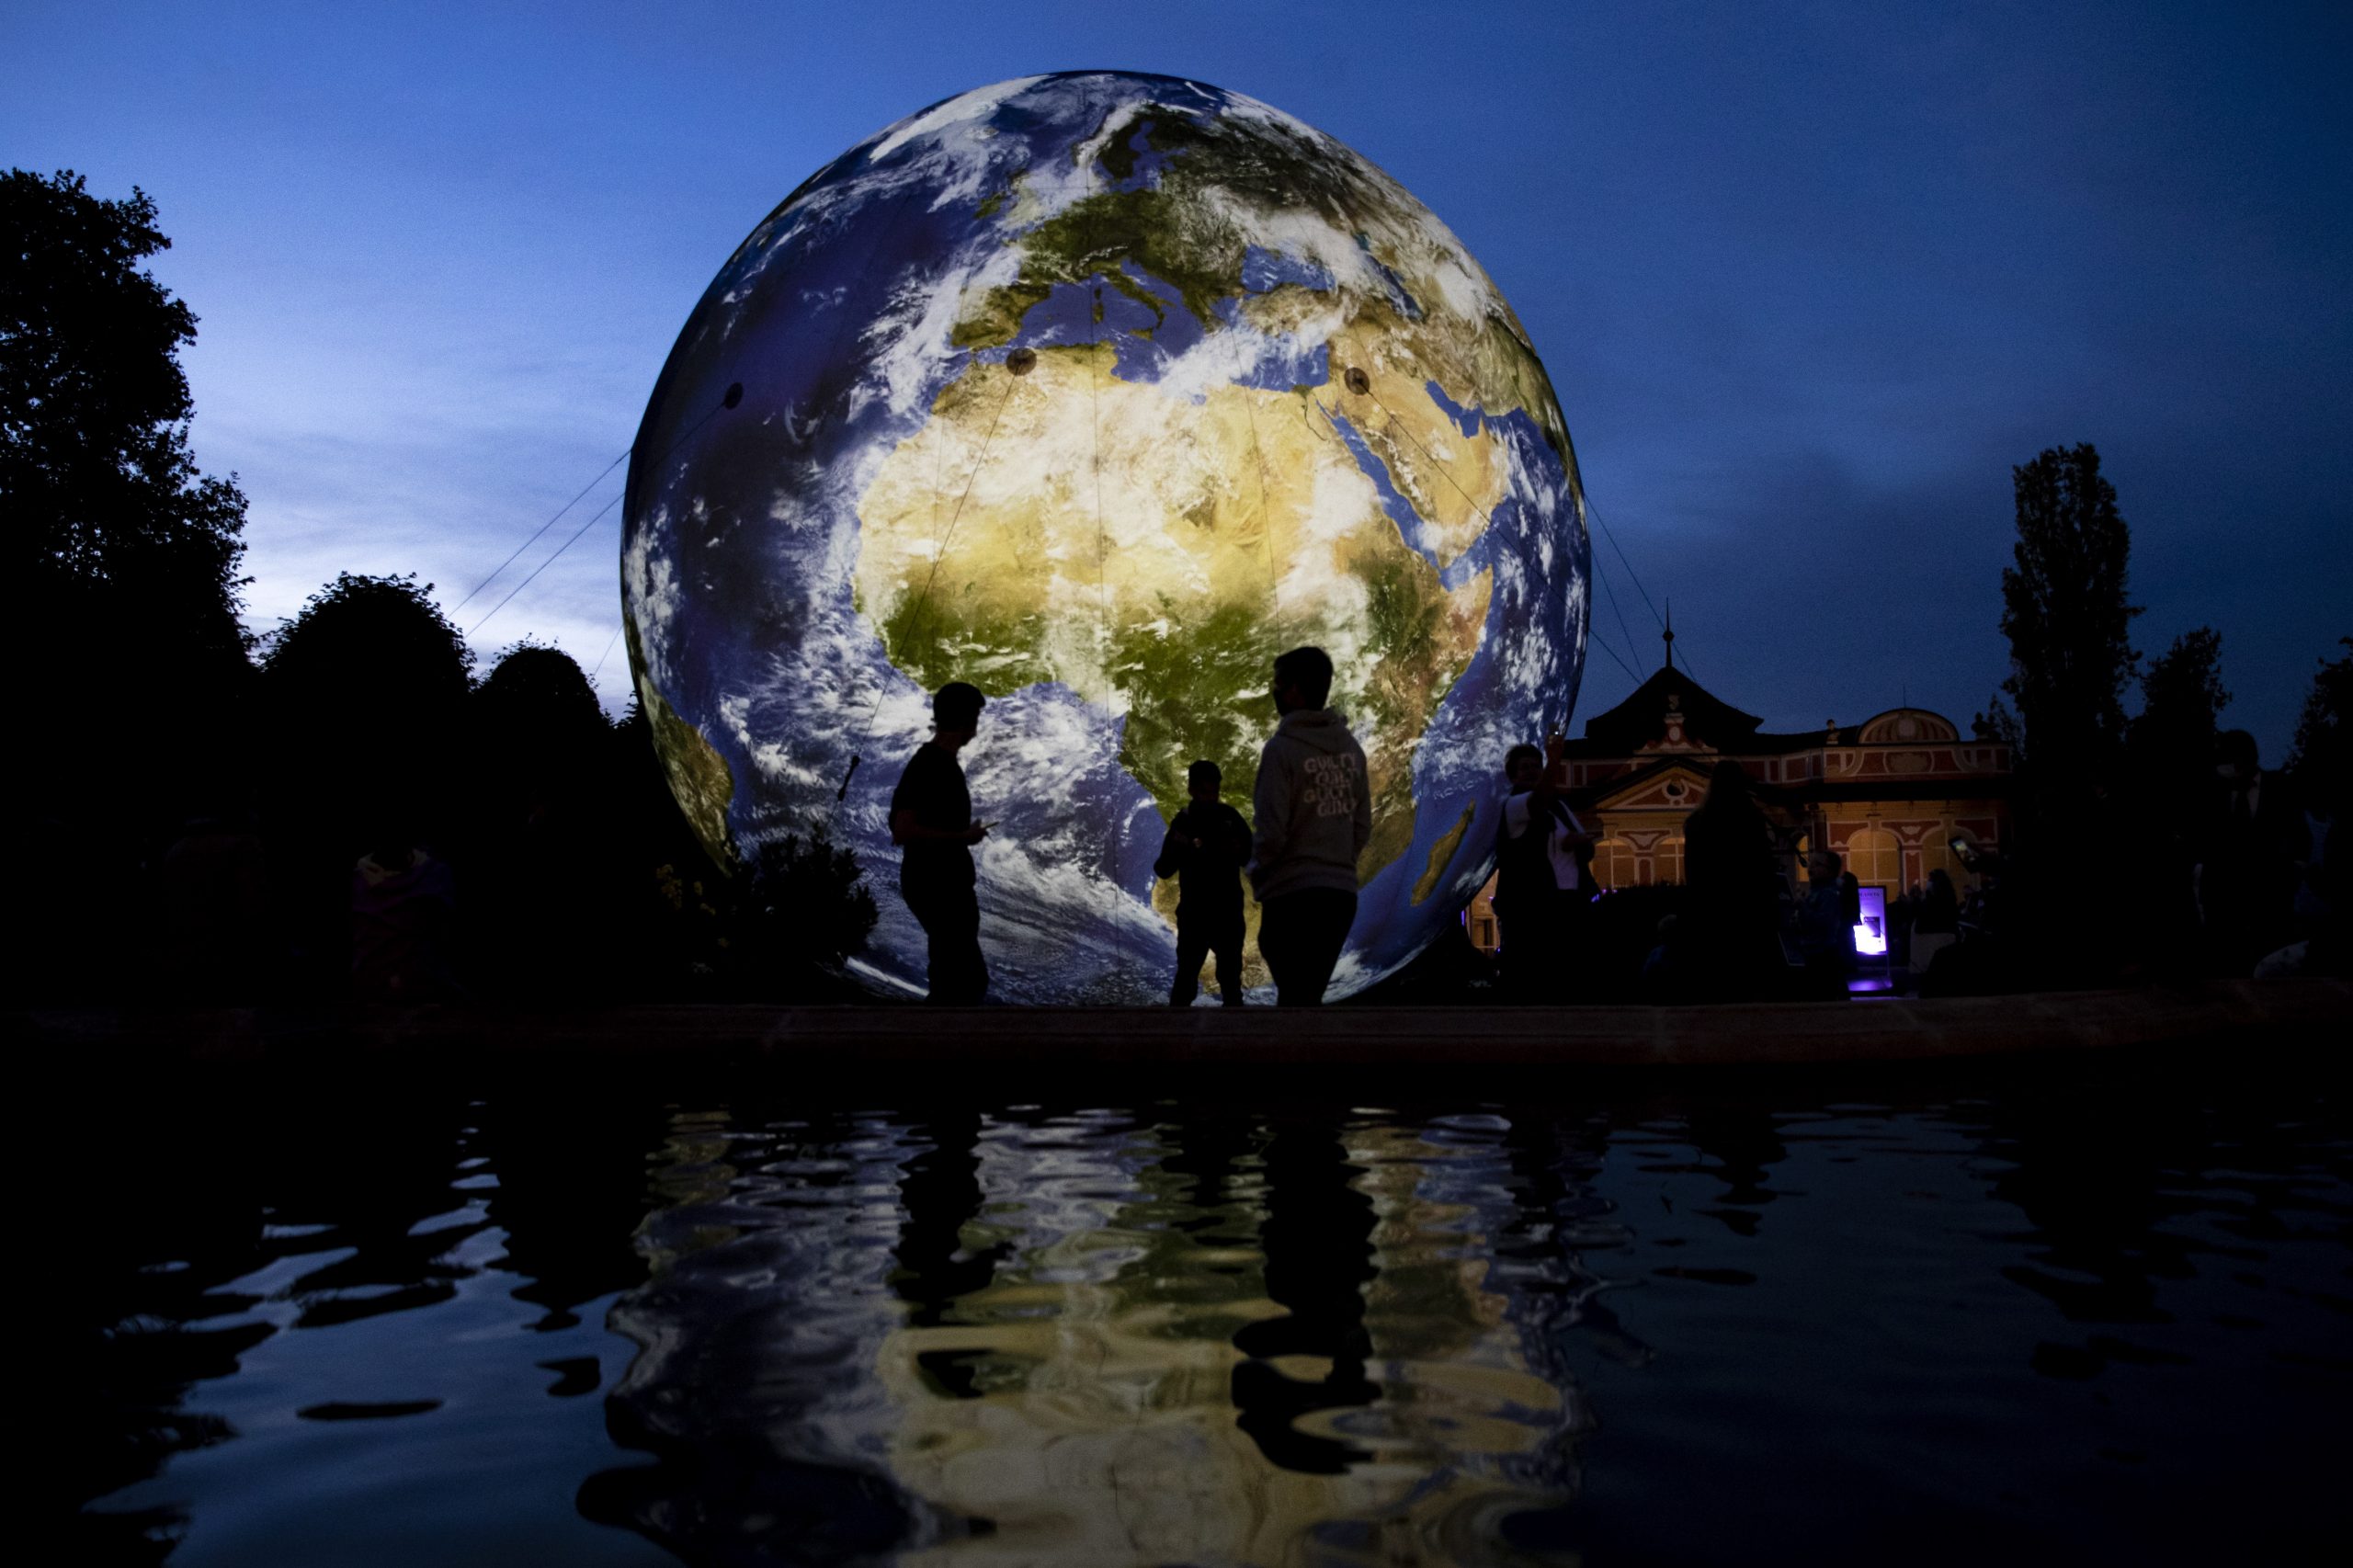 epa08682667 People stand in front of the giant inflatable model of the Earth during the European Sustainable Development Week, as well on World Clean Up day, at the garden of Czech Ministry of Foreign Affairs in Prague, Czech Republic, 19 September 2020. Through this event, the Czech Foreign Ministry wants to present a country as active in matters of sustainability and climate.  EPA/MARTIN DIVISEK